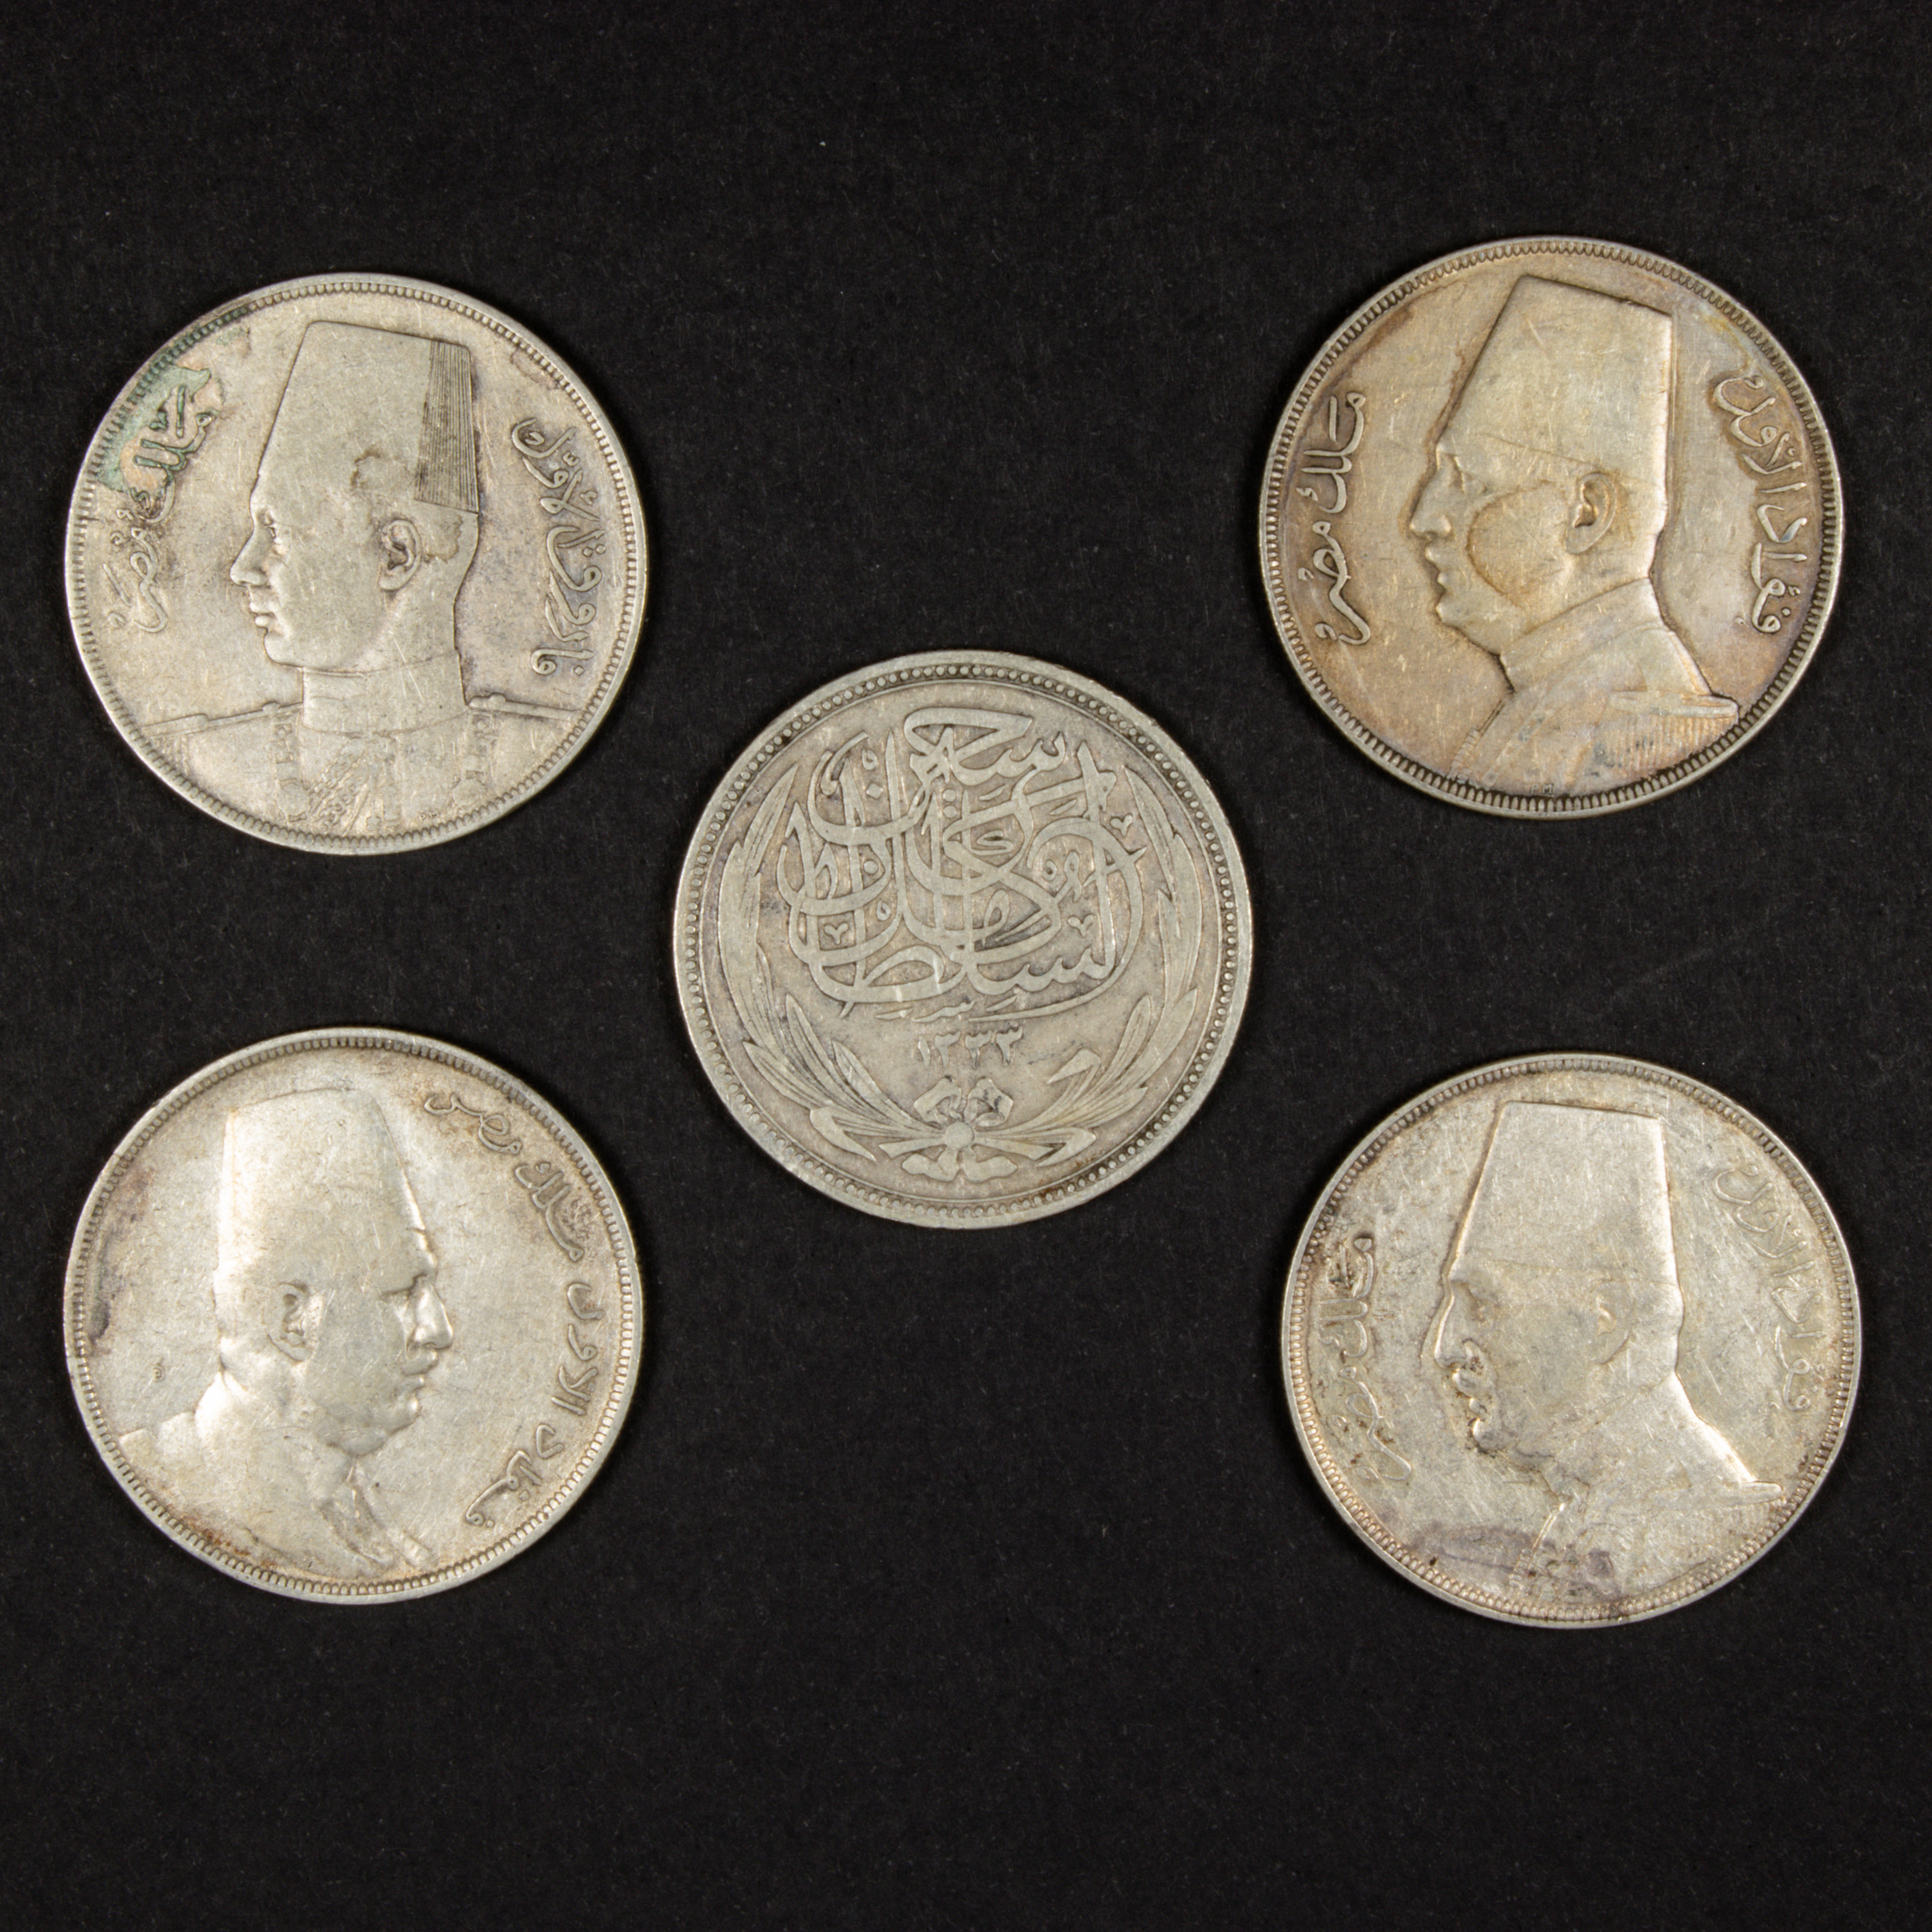  LOT OF 5 EGYPTIAN SILVER 20 PIASTRES 3a5438